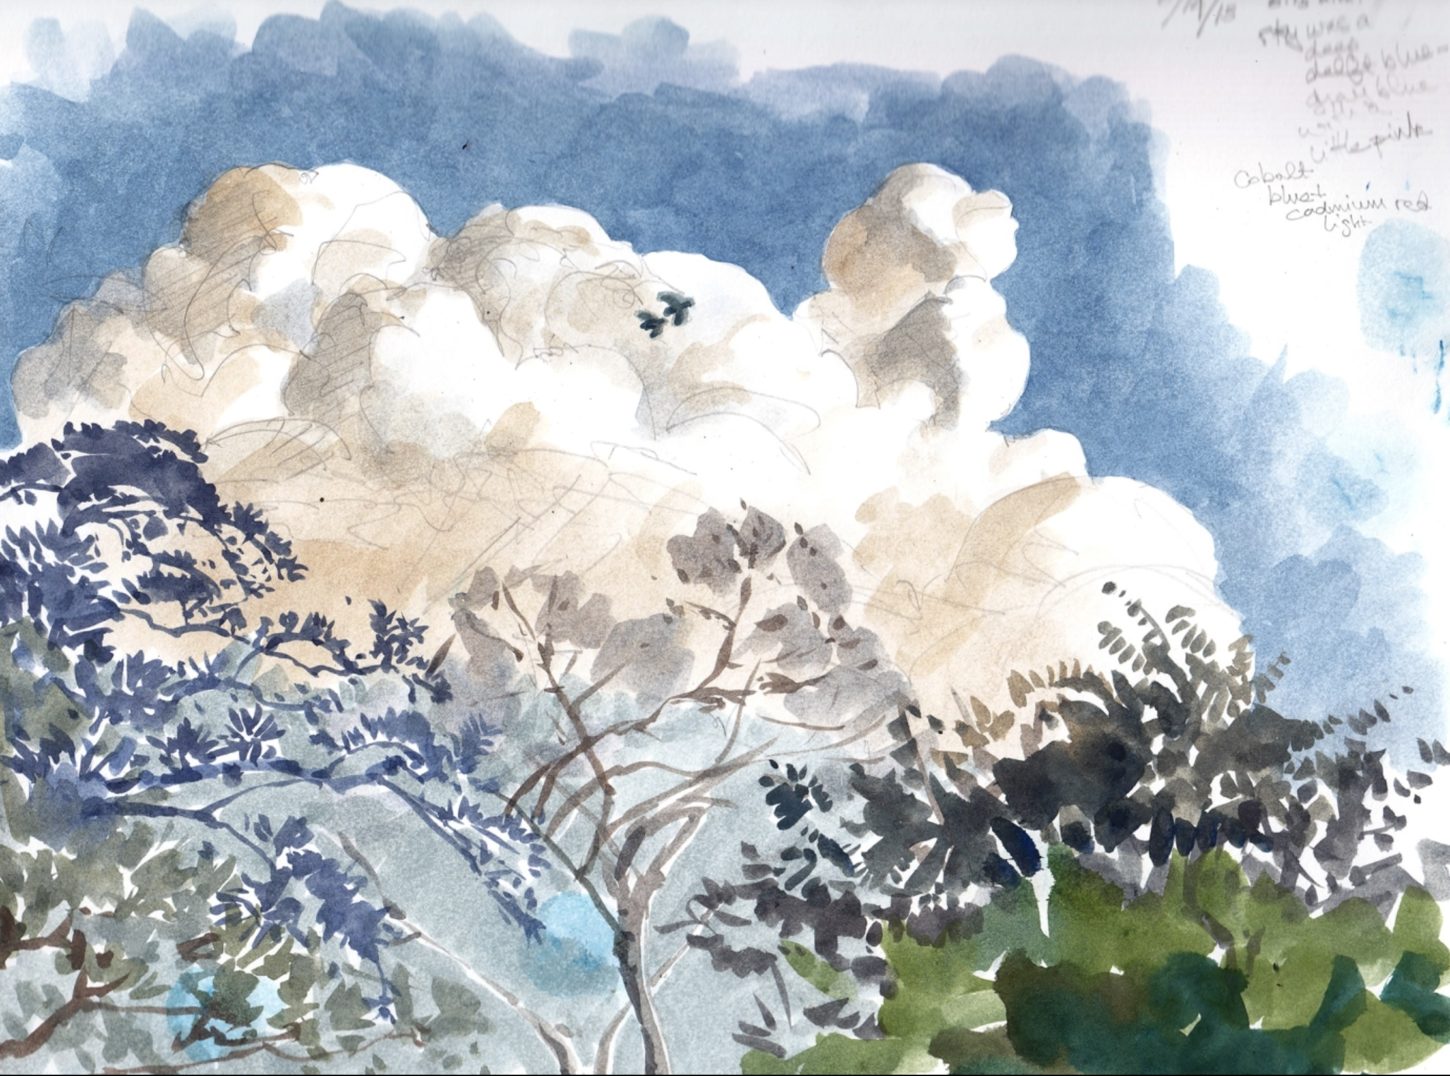 Here is an example of nature sketching using a different art medium in this case watercolor. The scene depicted is a rainforest with a cloud in the background.